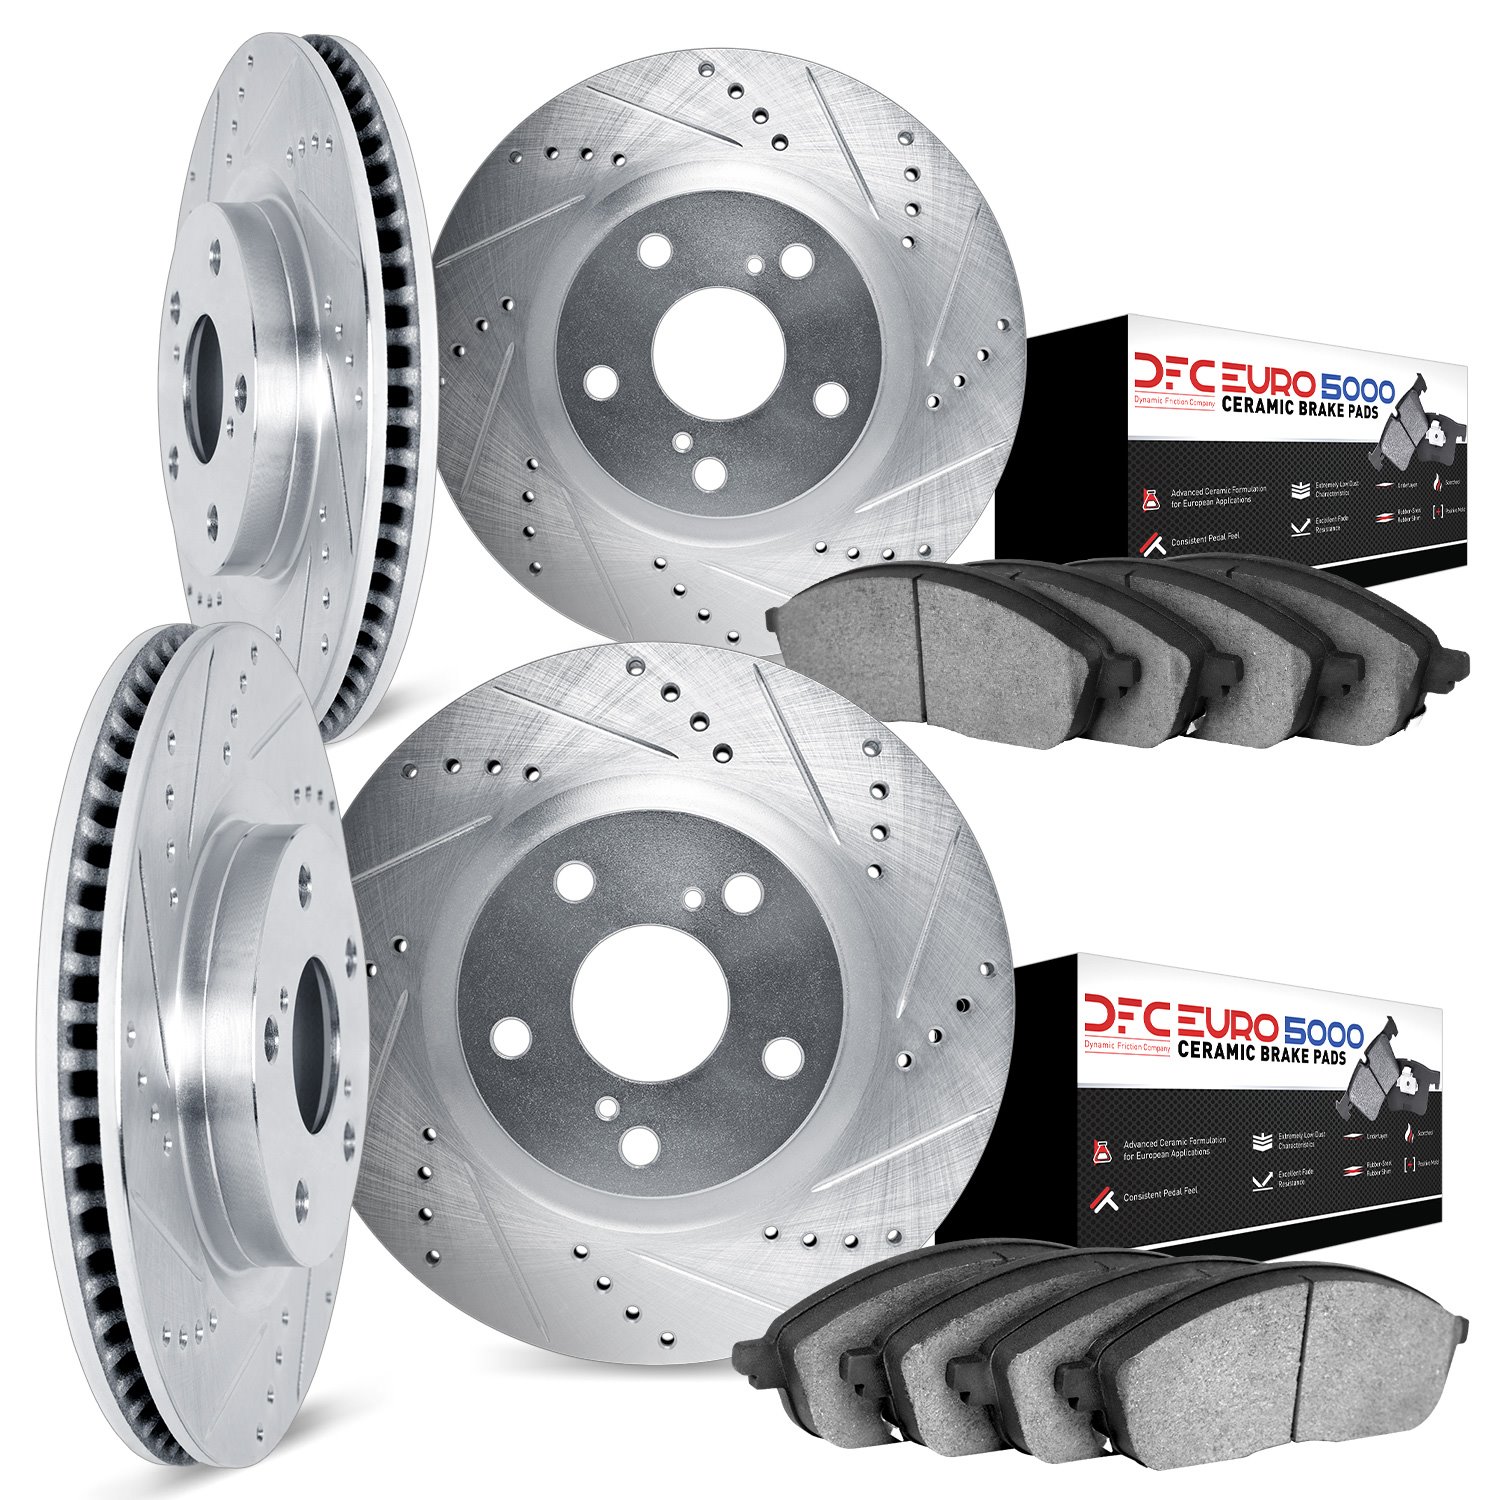 7604-02006 Drilled/Slotted Brake Rotors w/5000 Euro Ceramic Brake Pads Kit [Silver], 1991-1994 Porsche, Position: Front and Rear